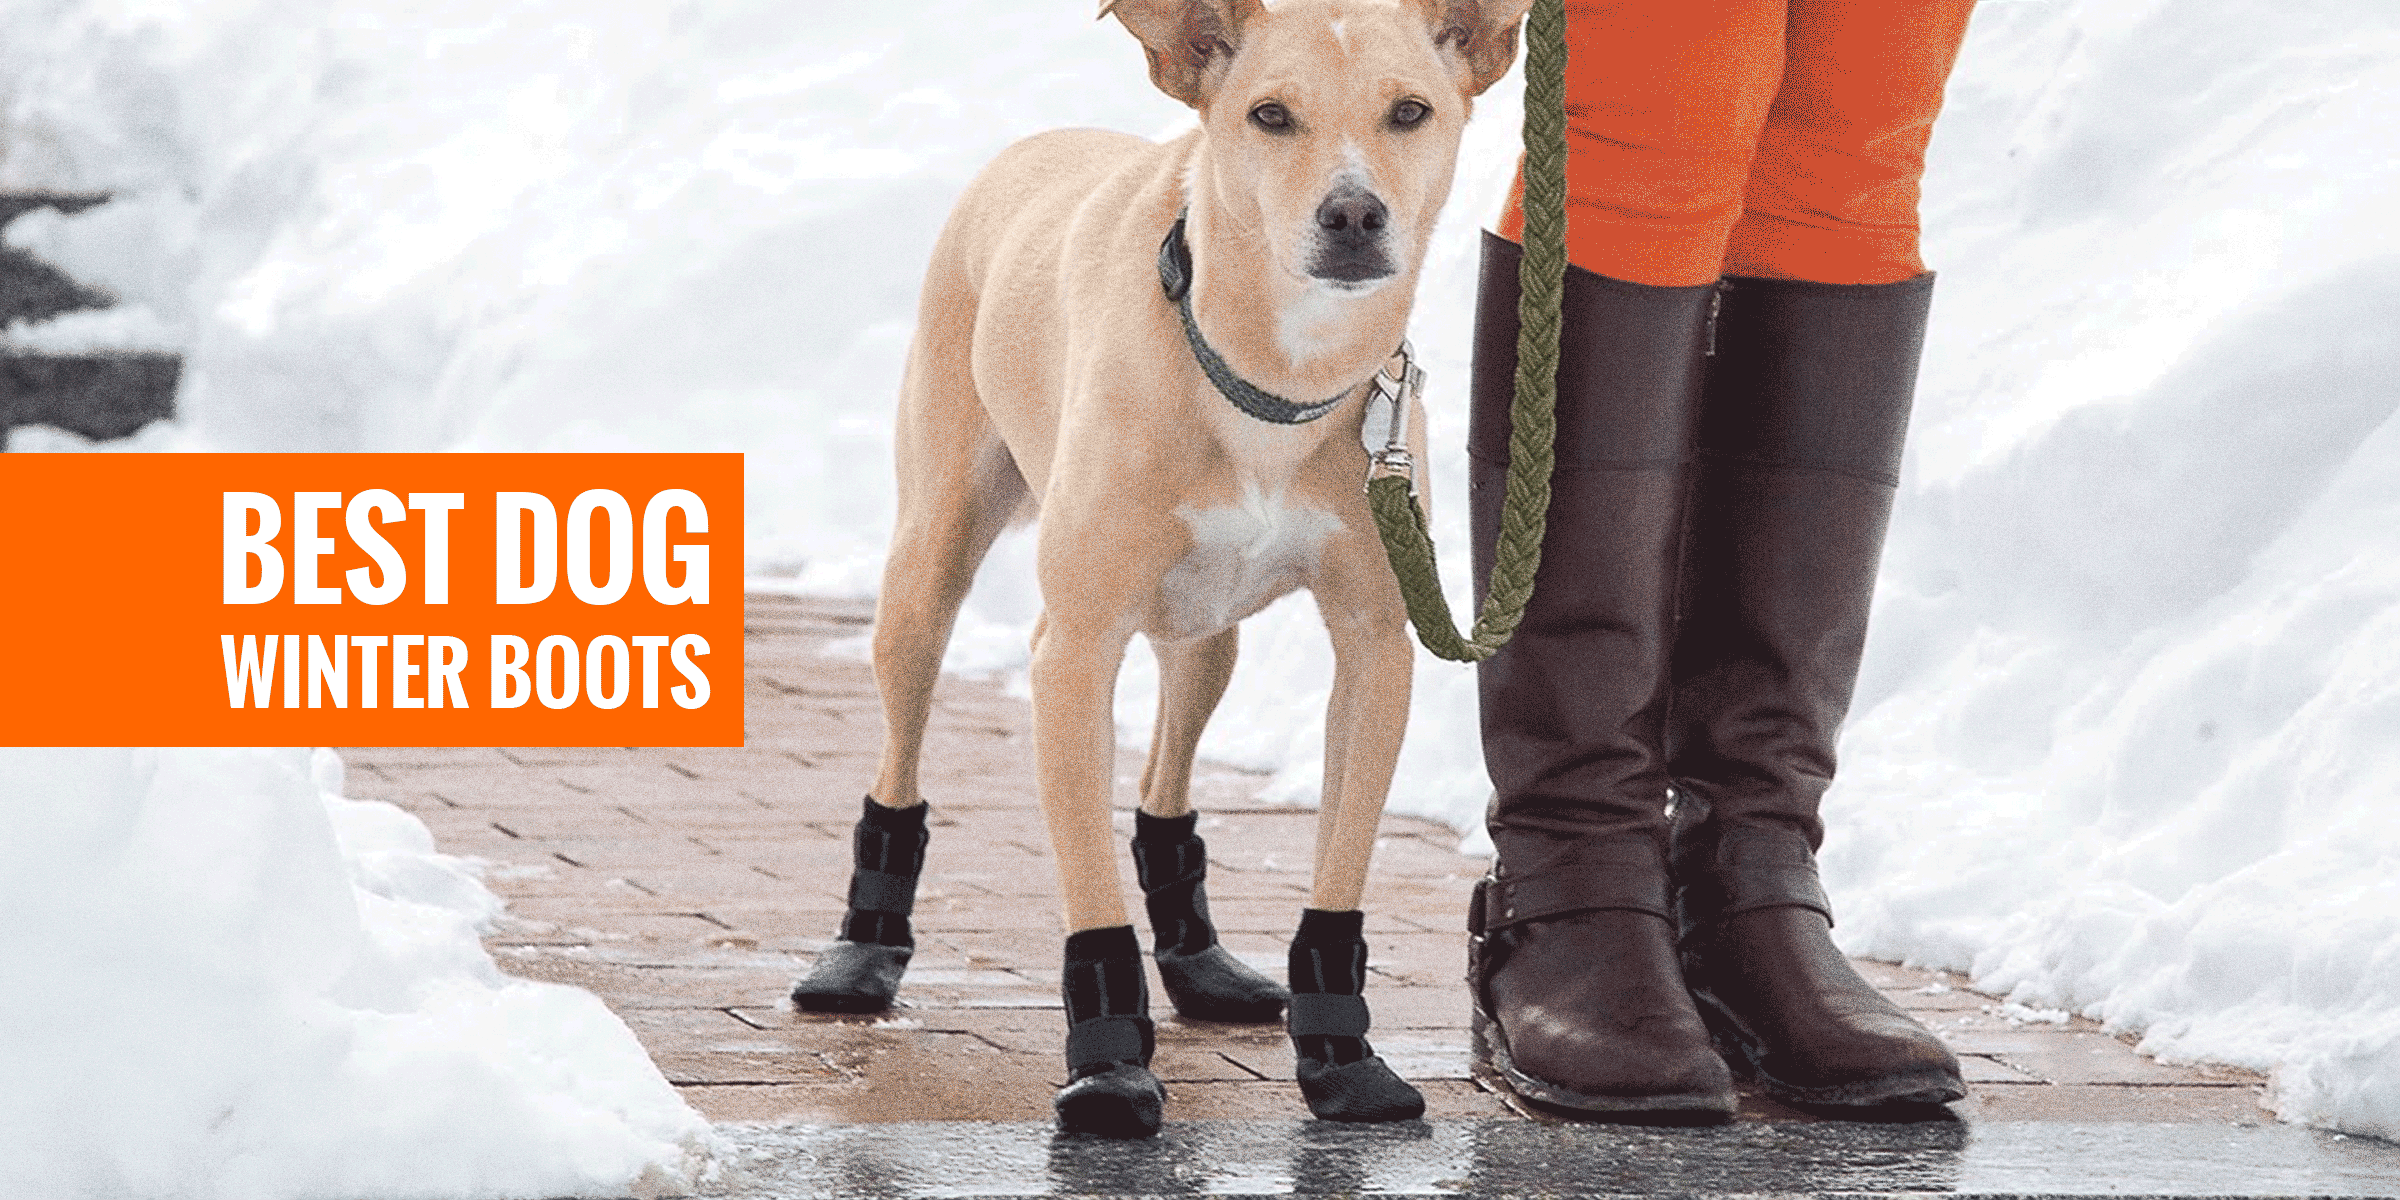 Outdoor Pet Snow Booties with Reflective Straps KOESON Waterproof Dog Boots Winter Pet Shoes Cold Weather Paw Protector with Anti-Slip Sole for Medium Large Dogs 4 Pcs 